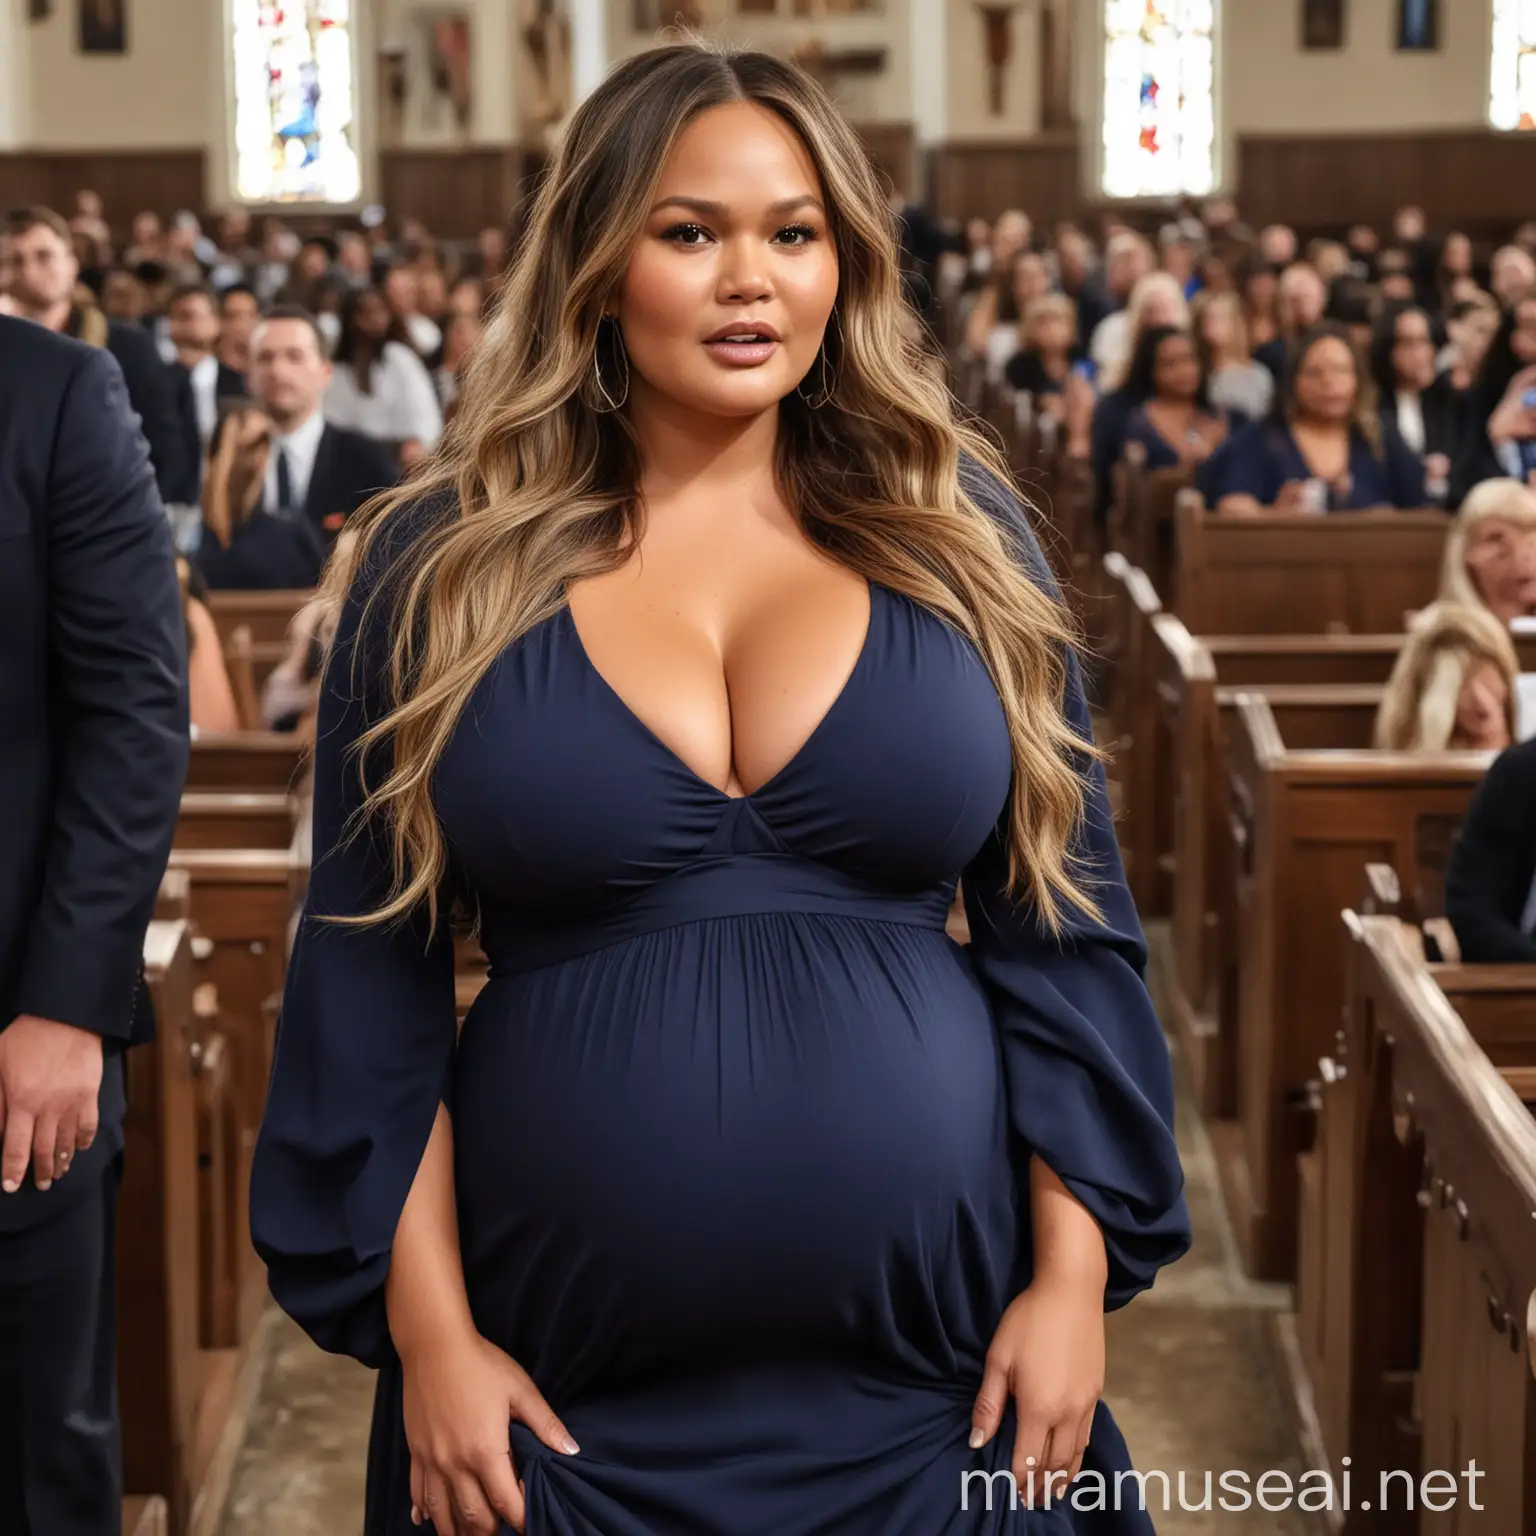 Chrissy Teigen in navy blue dress with big pregnant belly in church, bbw, giant breasts, showing massive cleavage, zoomed in from the waist up, big long kinky hair in a ponytail